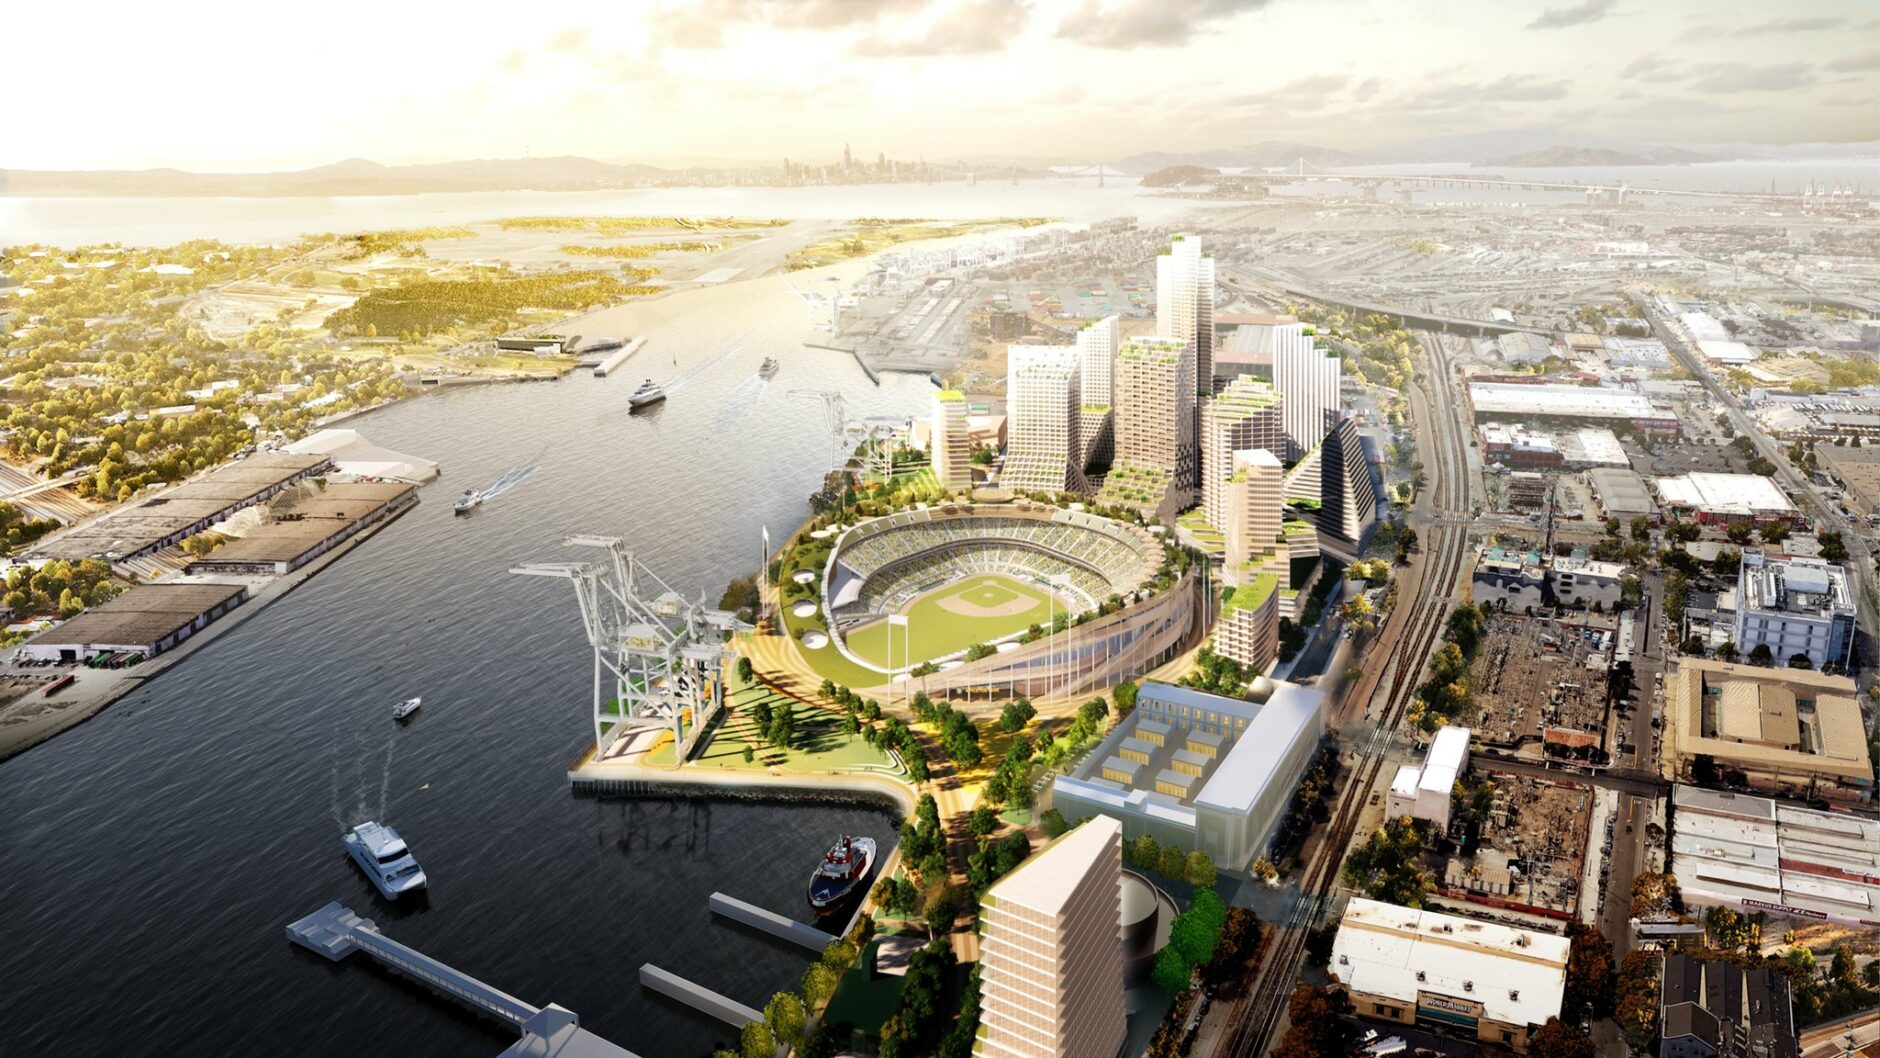 Plan for new Oakland A’s stadium project clears environmental impact